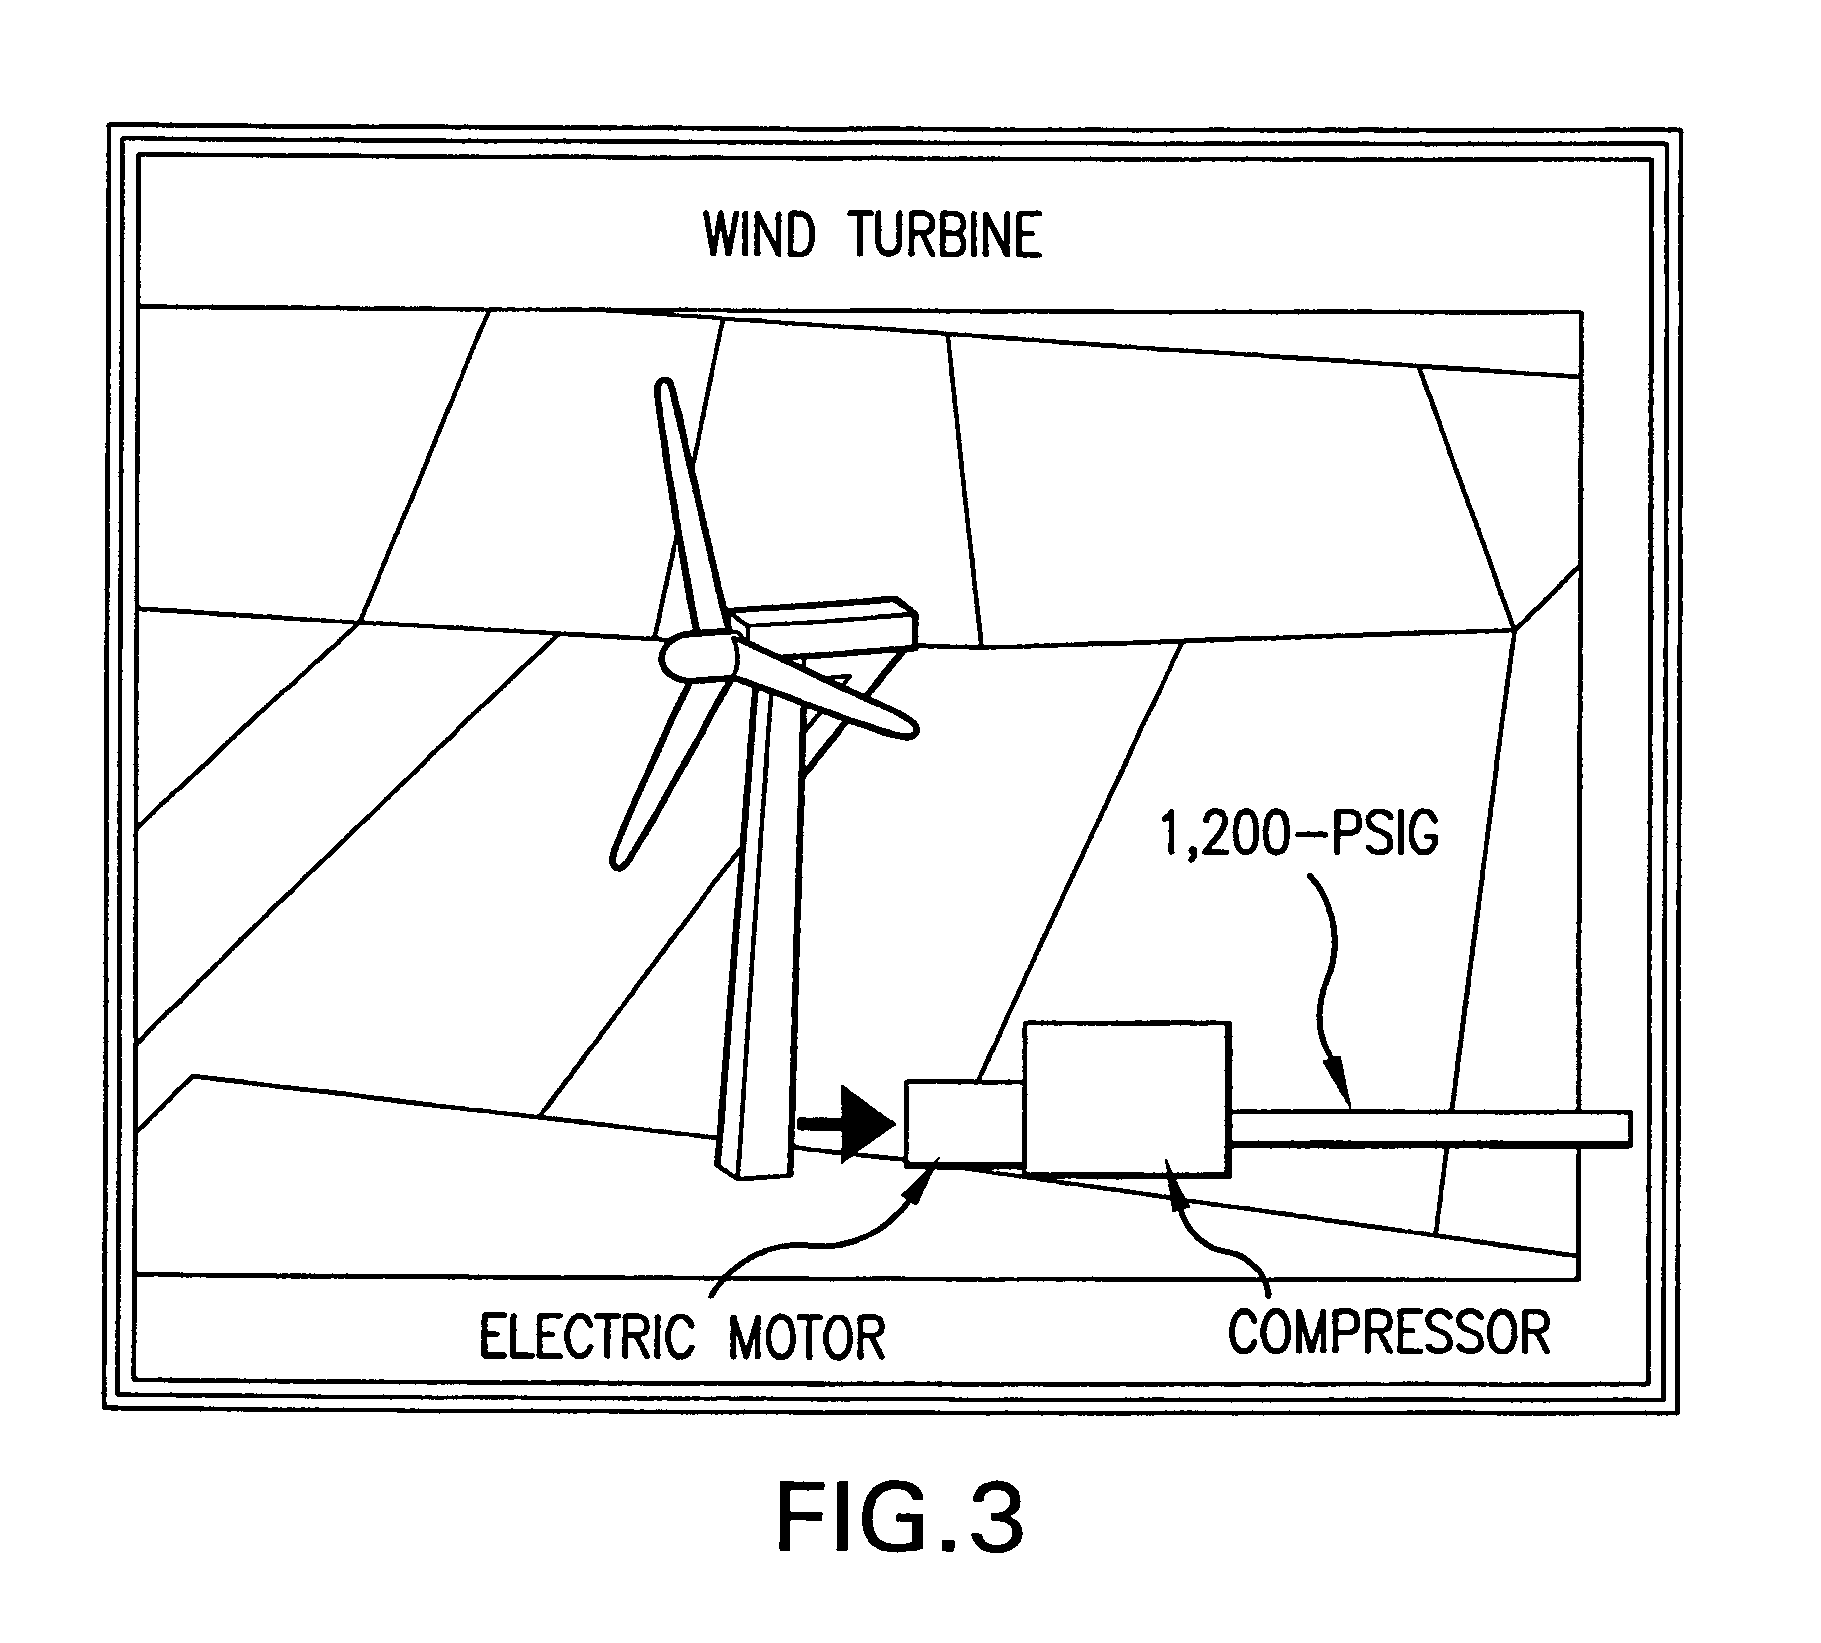 Method of transporting and storing wind generated energy using a pipeline